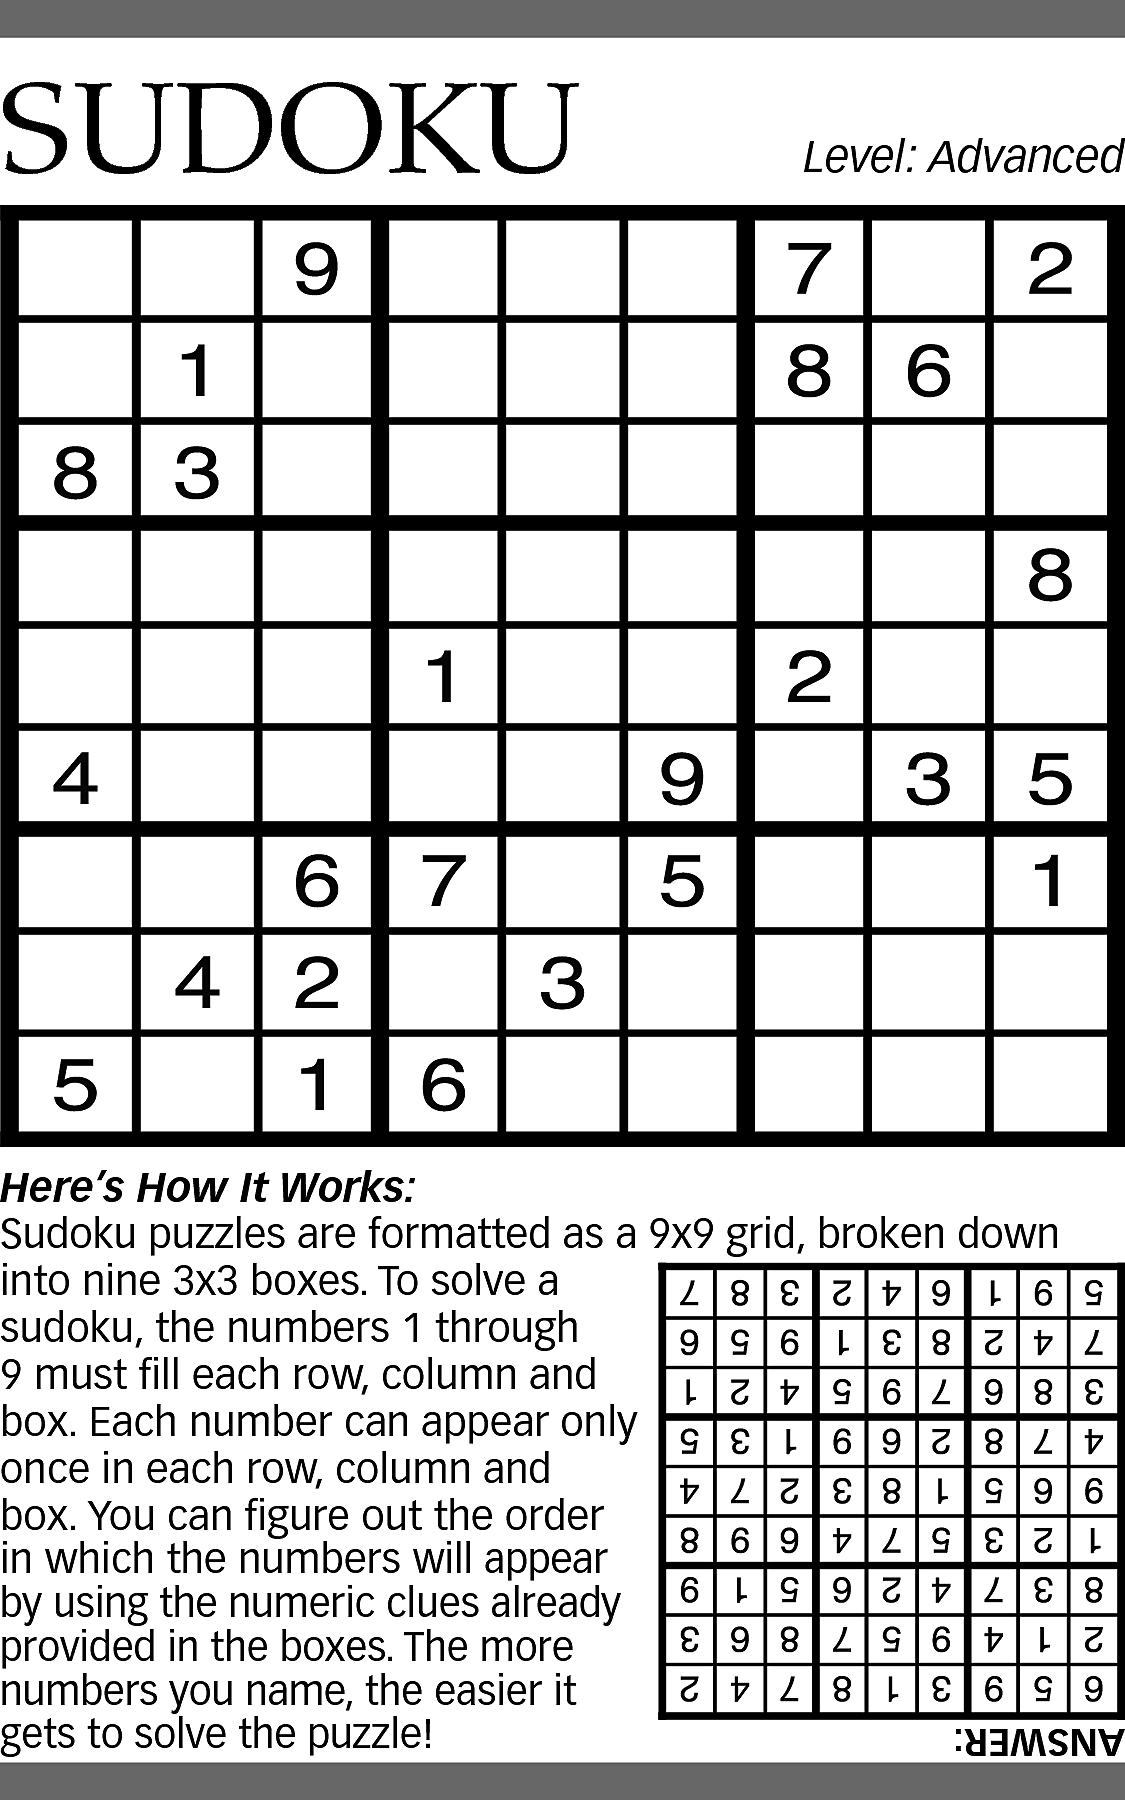 SUDOKU <br> <br>Level: Advanced <br>  SUDOKU    Level: Advanced    Here’s How It Works:  Sudoku puzzles are formatted as a 9x9 grid, broken down  into nine 3x3 boxes. To solve a  sudoku, the numbers 1 through  9 must fill each row, column and  box. Each number can appear only  once in each row, column and  box. You can figure out the order  in which the numbers will appear  by using the numeric clues already  provided in the boxes. The more  numbers you name, the easier it  gets to solve the puzzle!    ANSWER:    